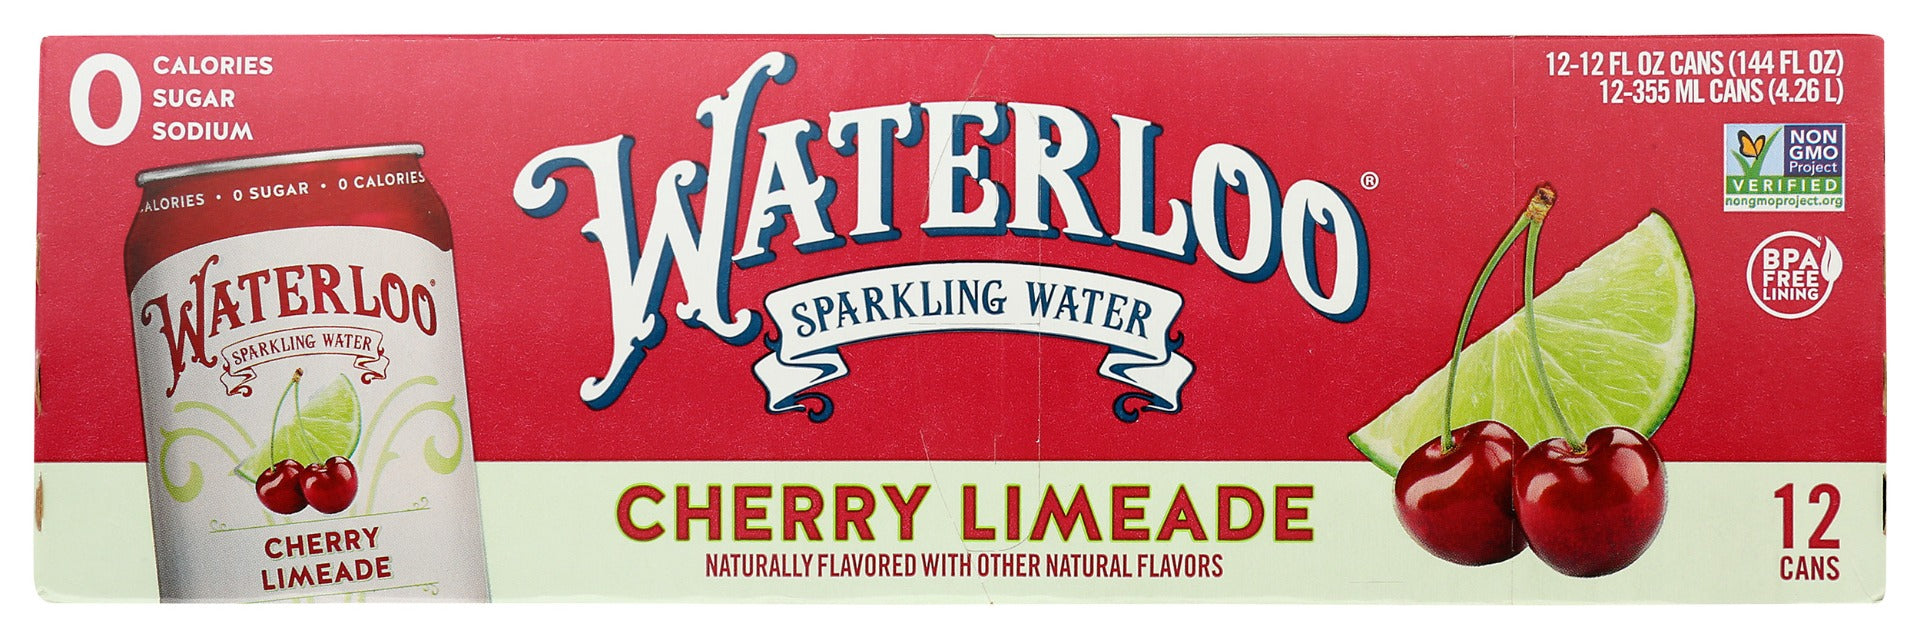 WATERLOO SPARKLING WATER: Water Chrry Lmade Sprklng, 144 FO